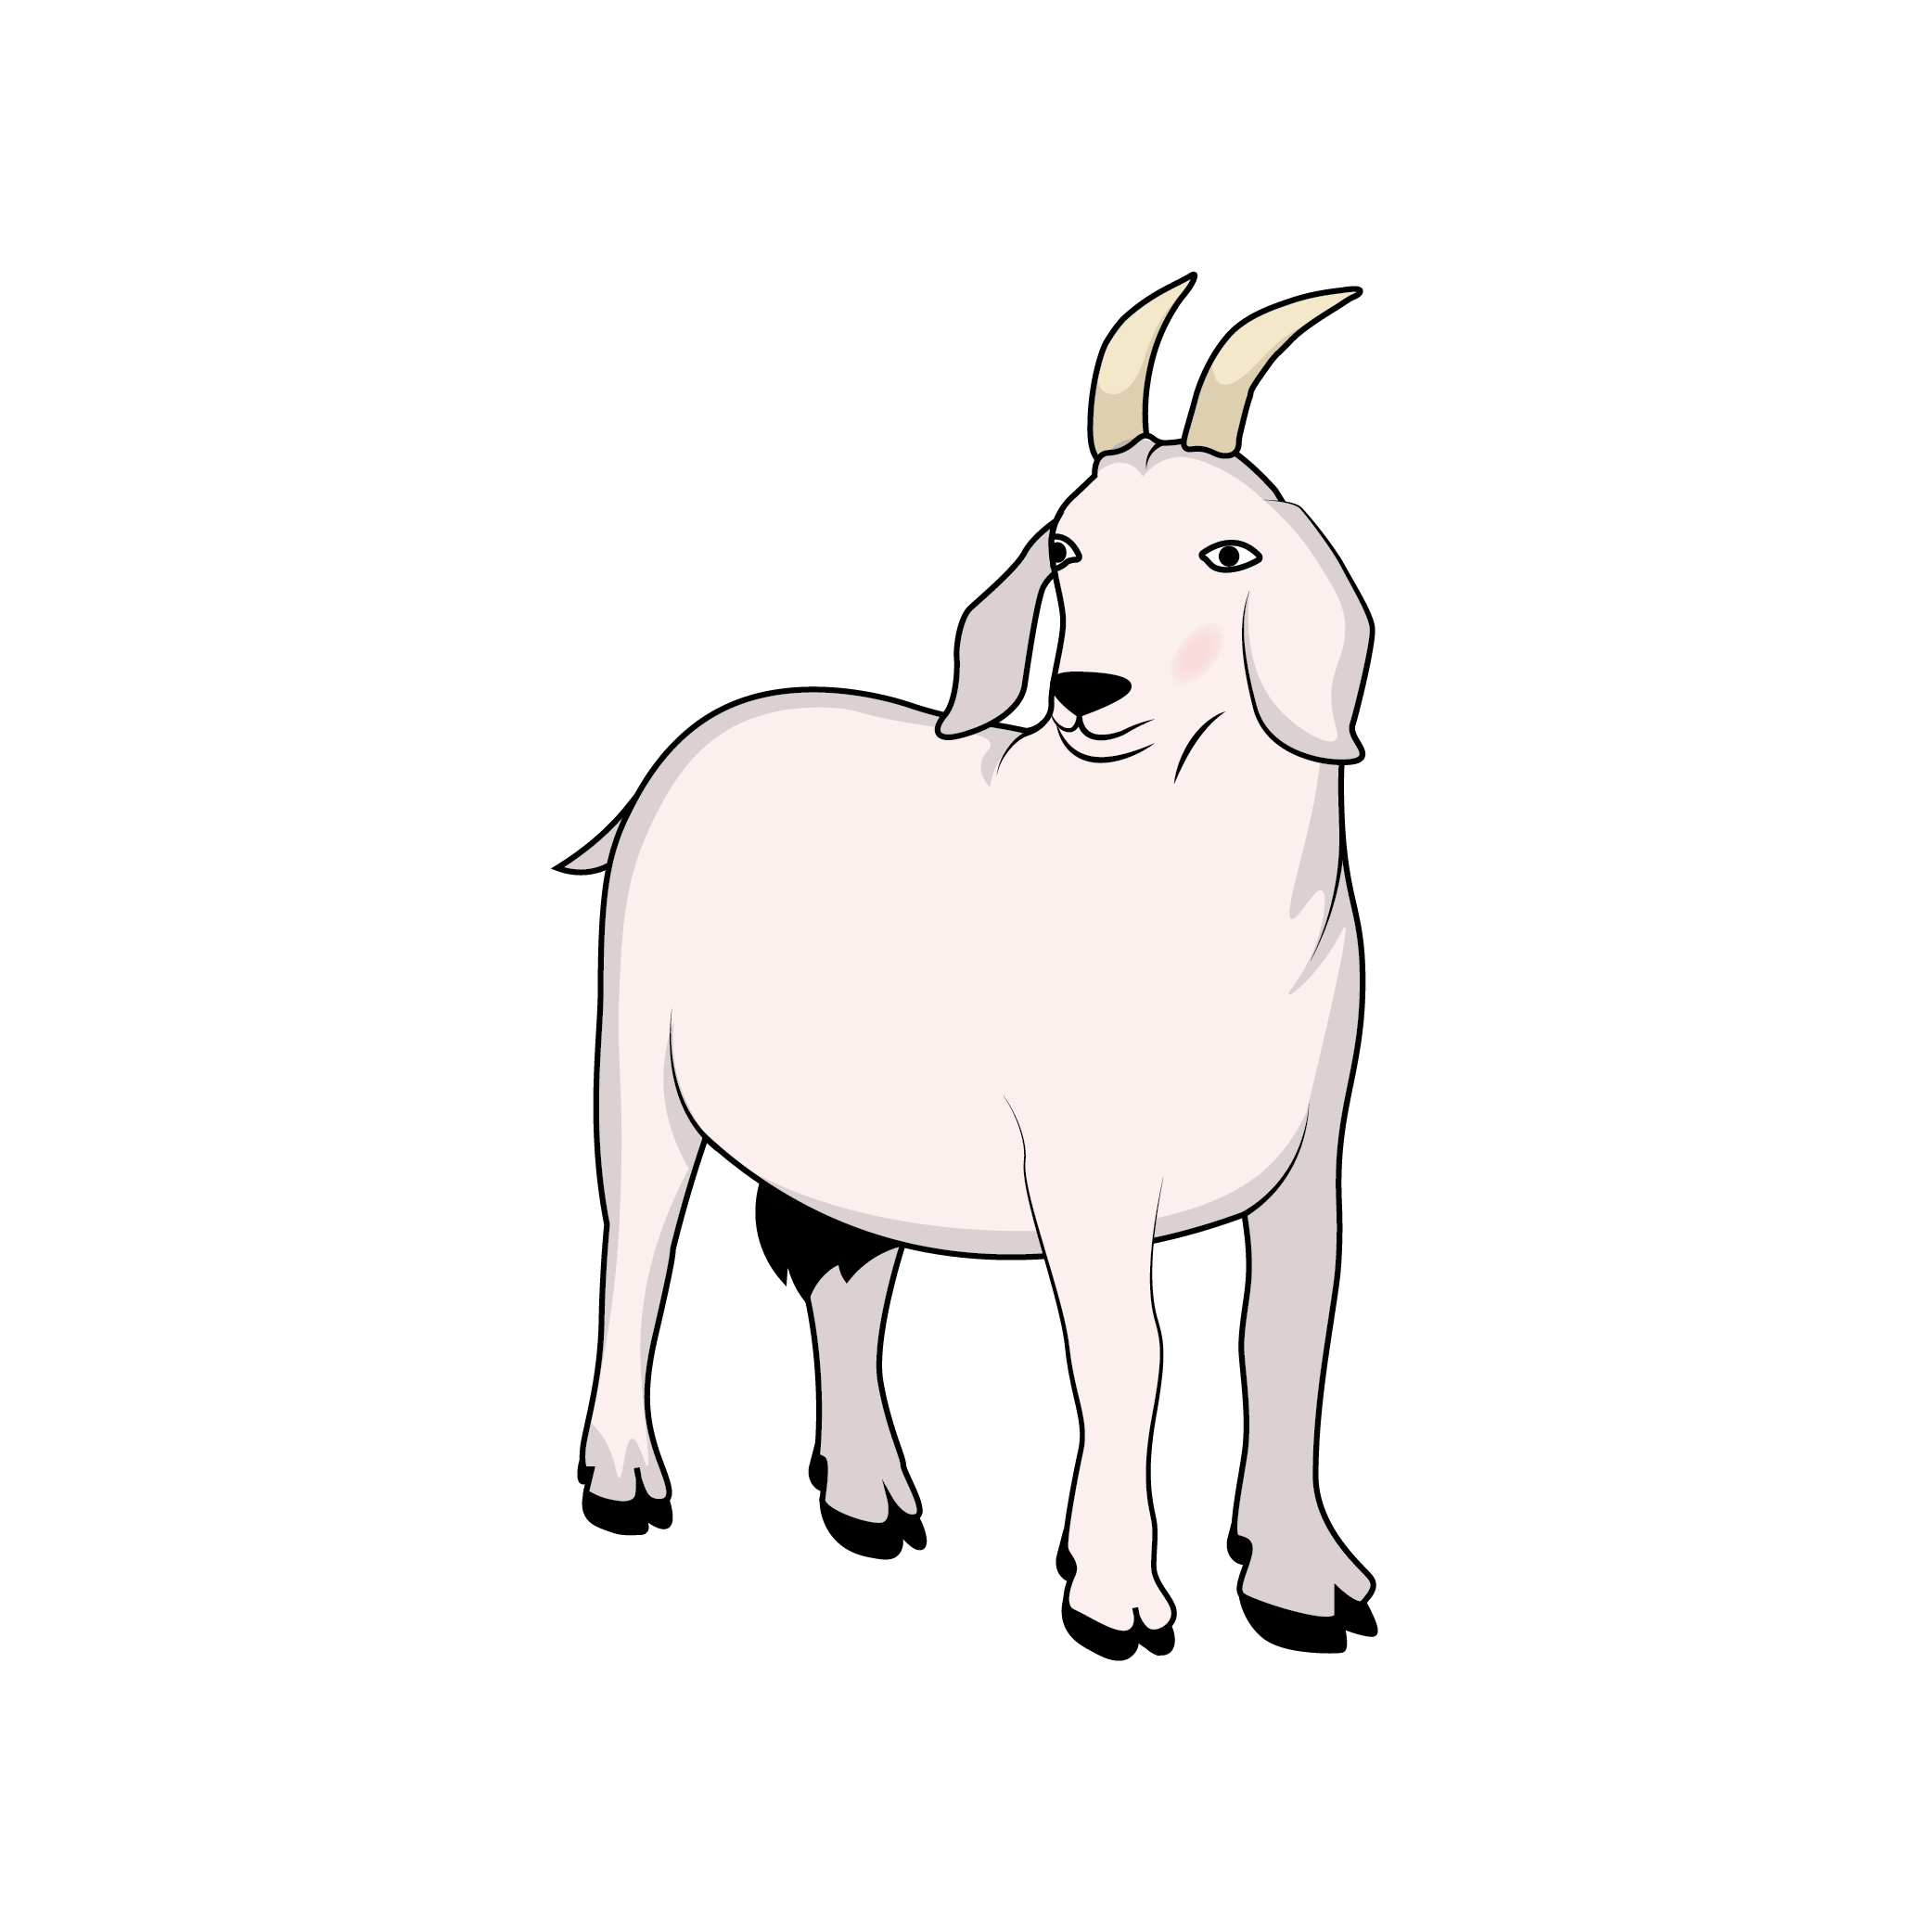 How to Draw A Goat Step by Step